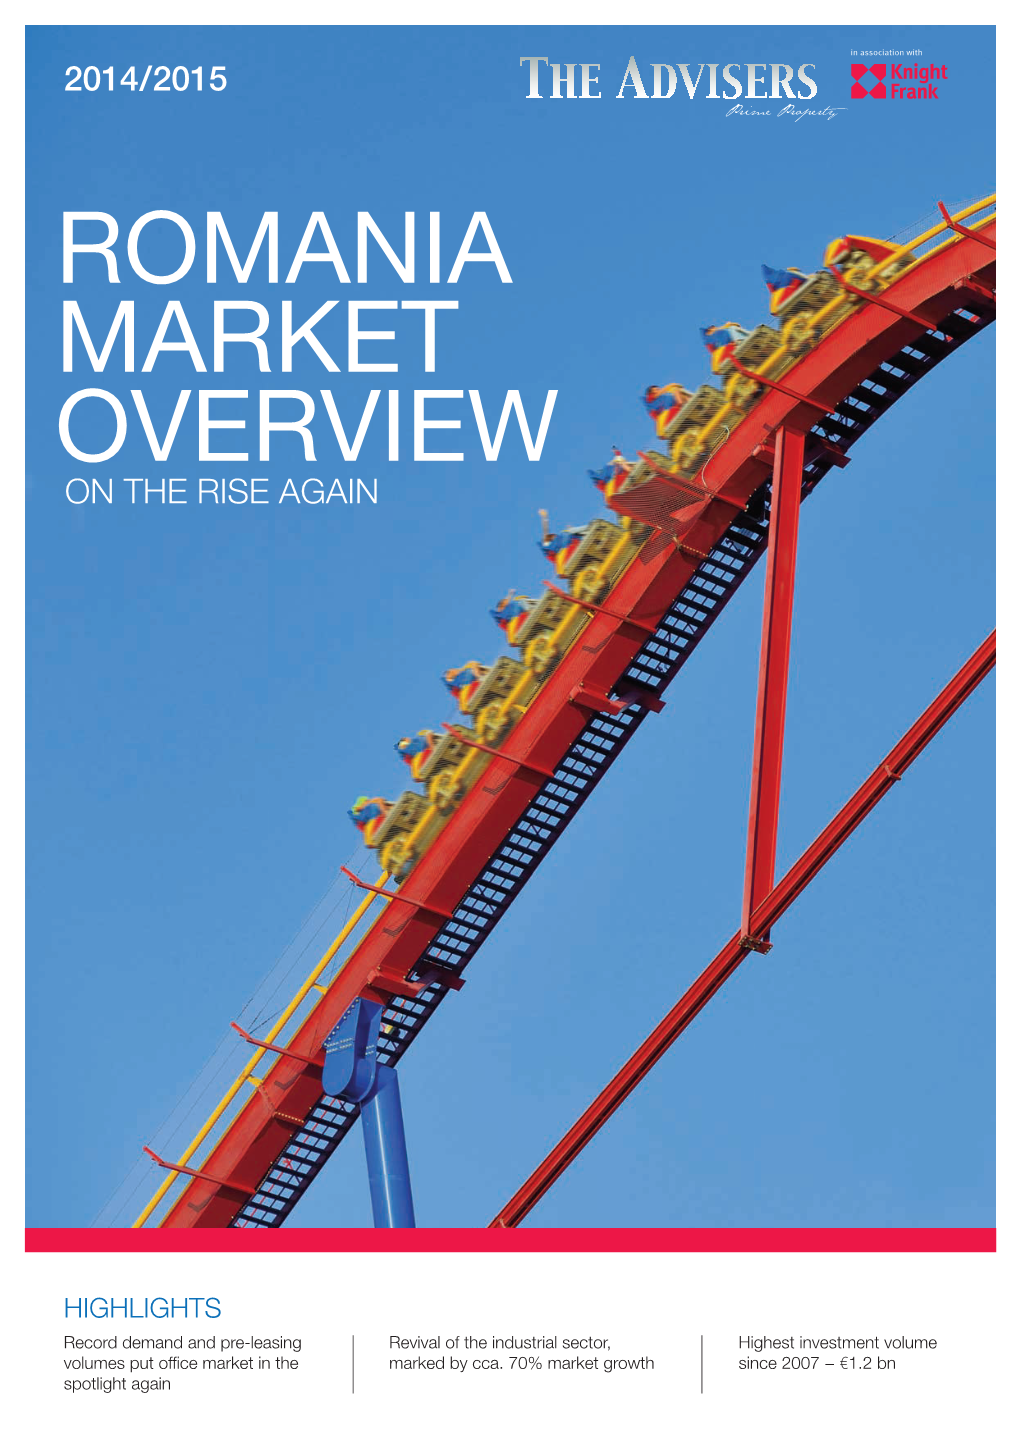 Romania Market Overview on the Rise Again